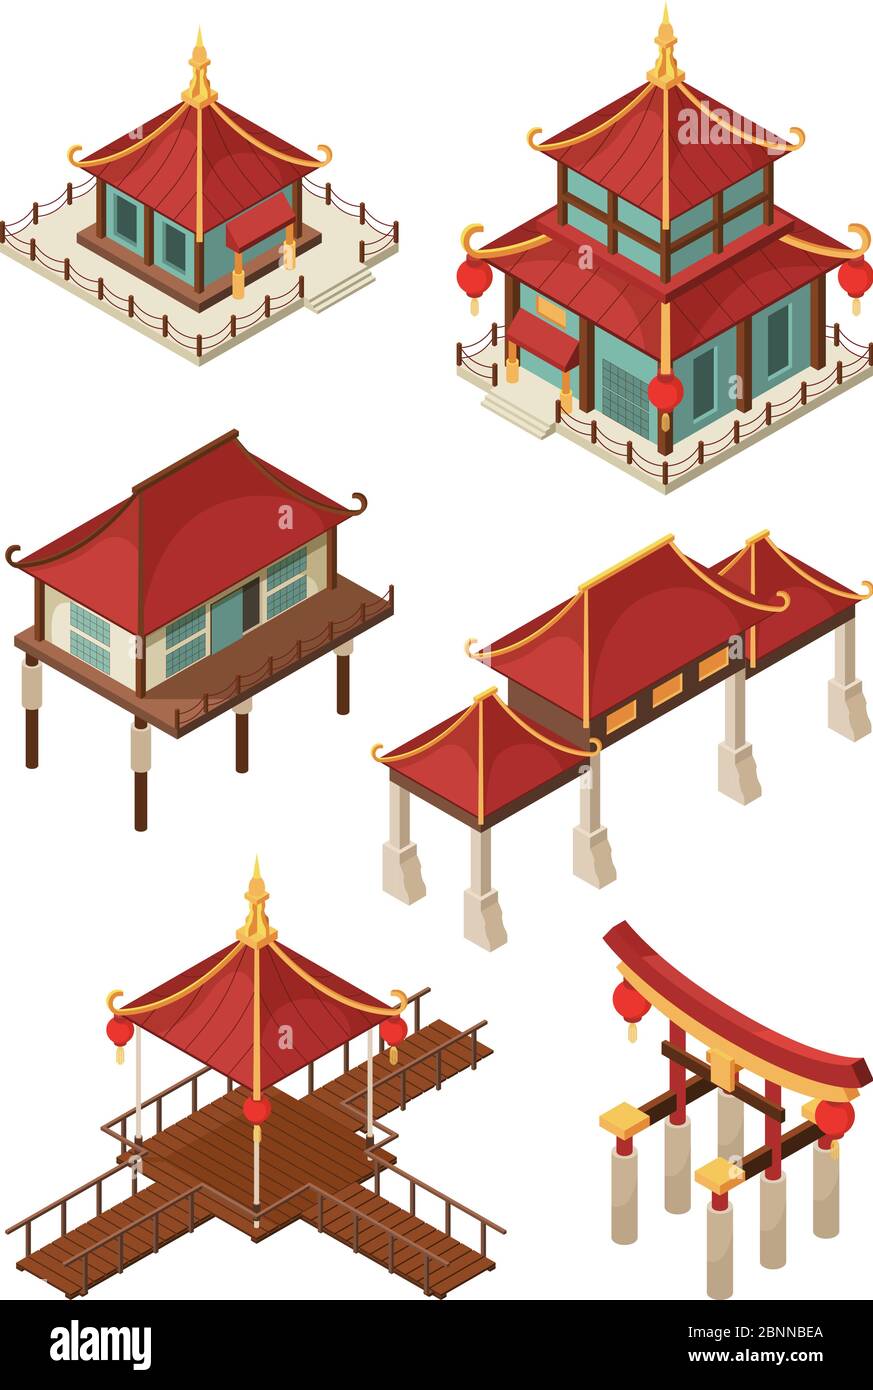 Asian architecture isometric. Traditional chinese and japan houses buildings roof vector 3d illustrations Stock Vector